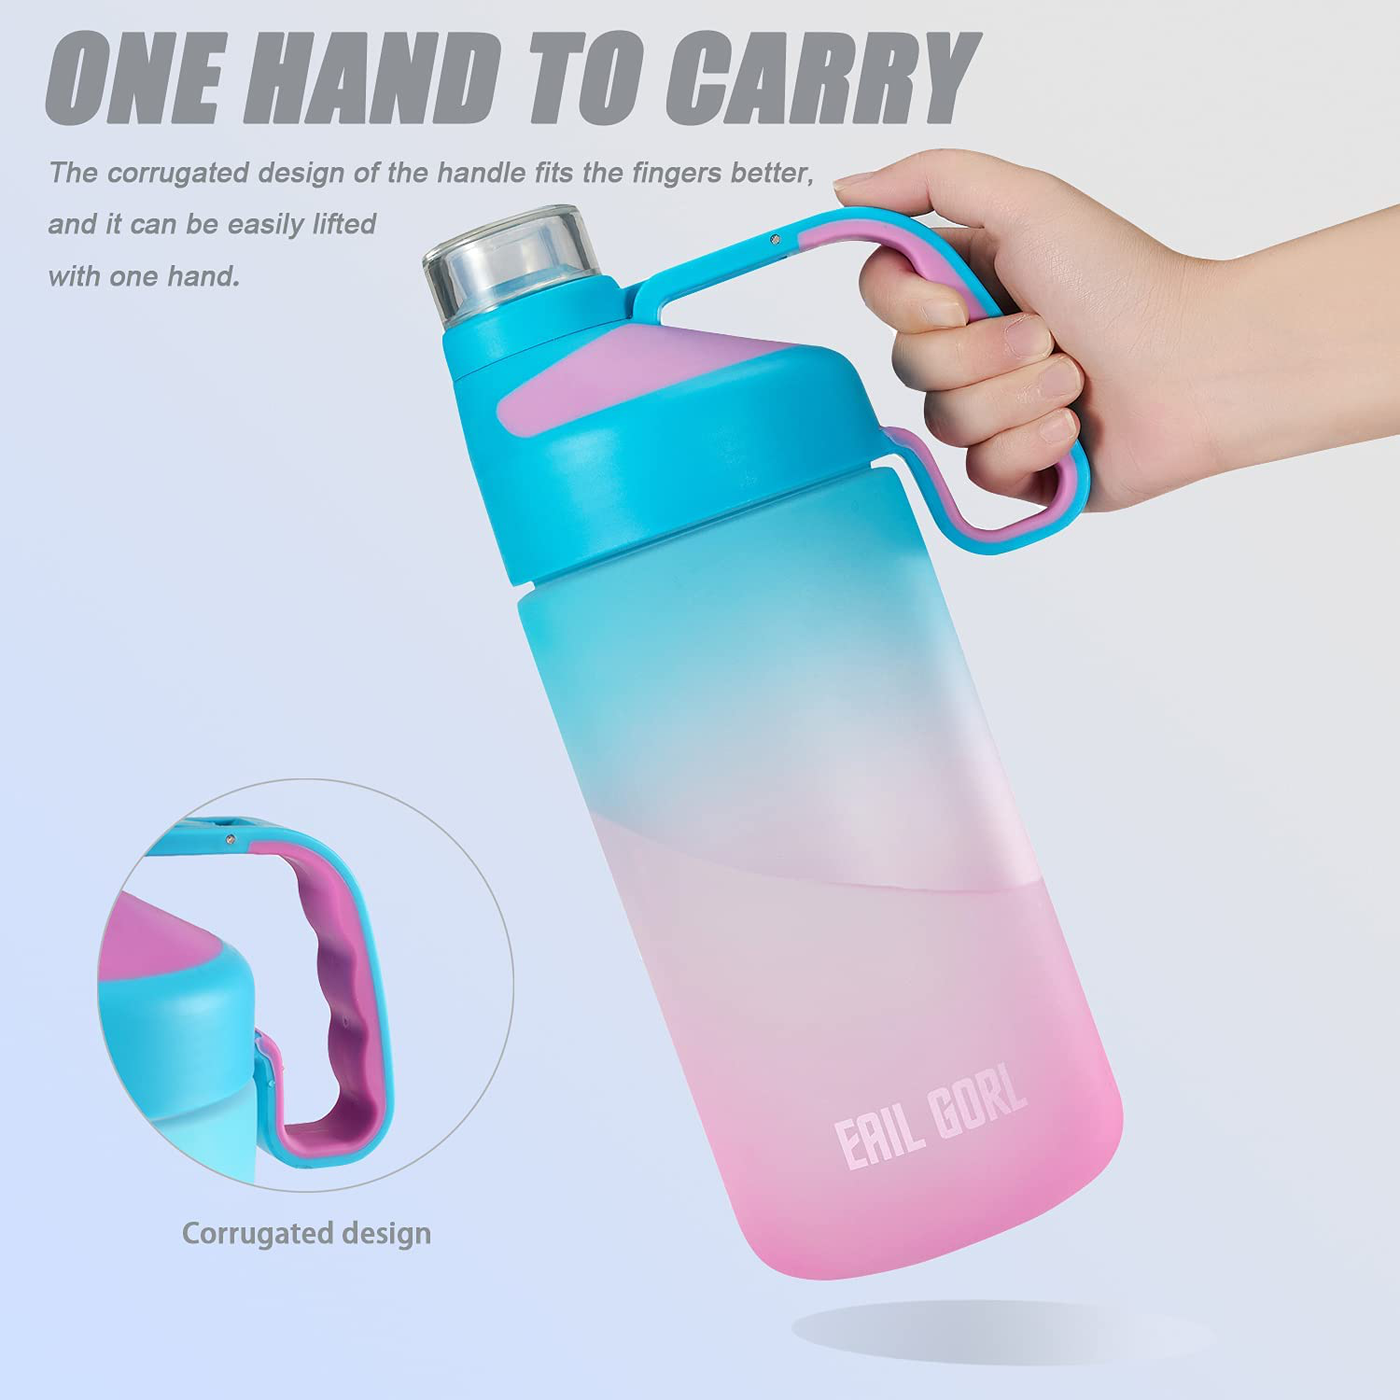 EAILGORL Water Bottles with Motivational Time Marker & Straw Leakproof BPA Free Reusble Flip Top Water Bottle for Sports and Fitness Enthusiasts (A1-Pink/Green Gradient)